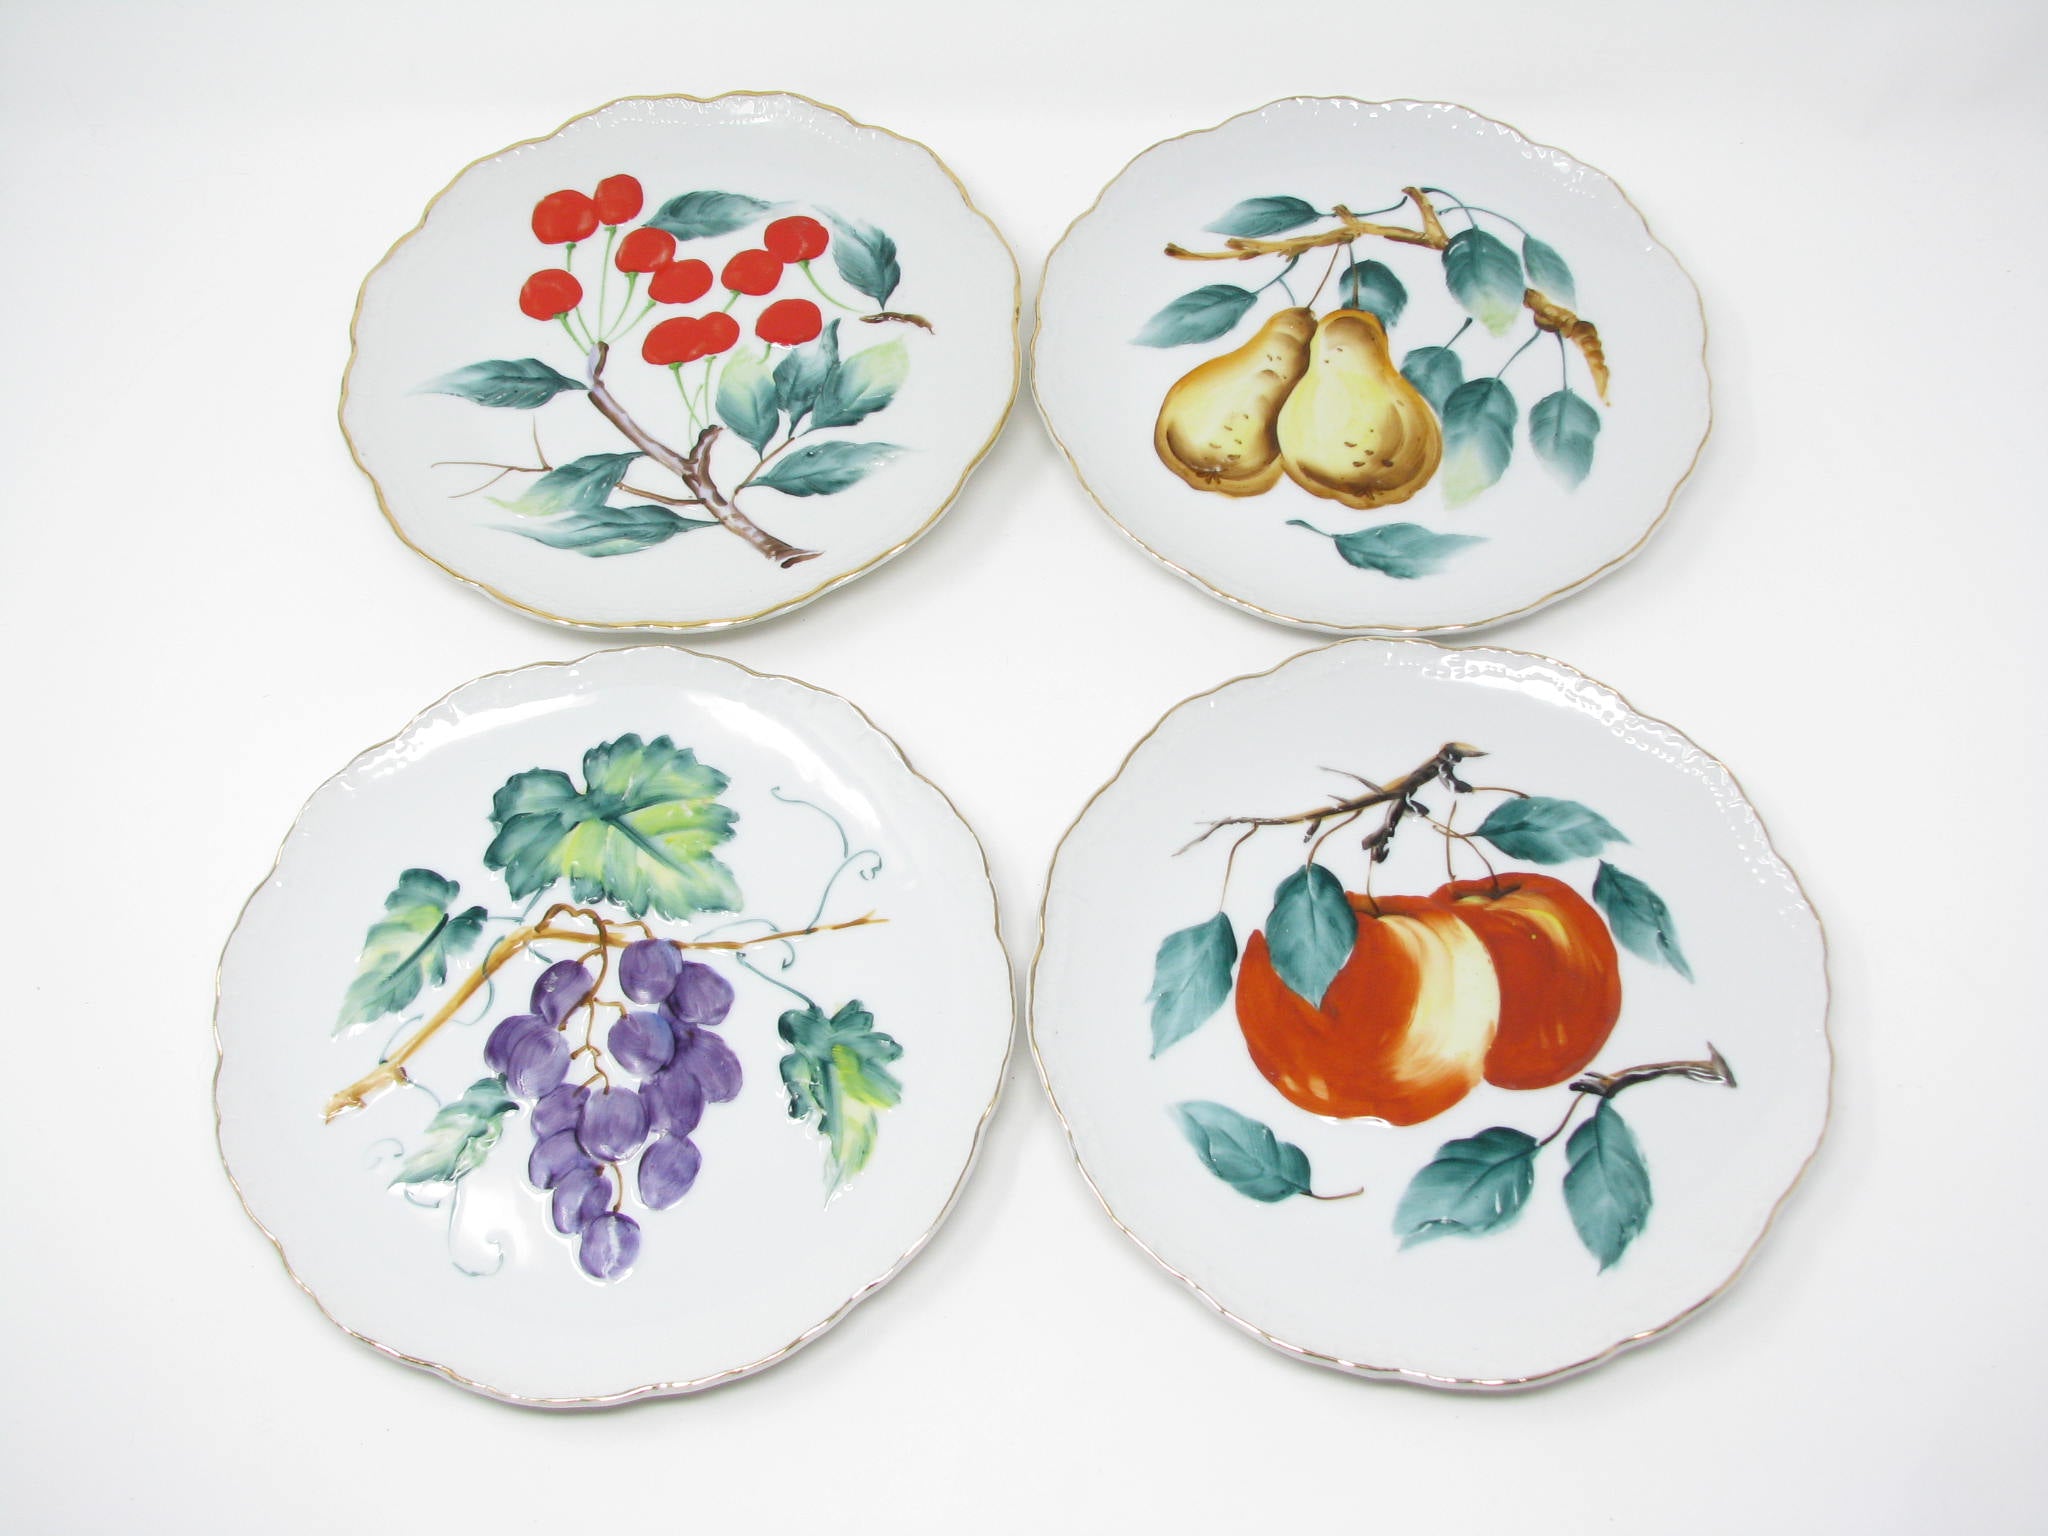 edgebrookhouse - Vintage Porcelain Decorative Plates with Embossed Fruits and Gold Trim - 4 Pieces